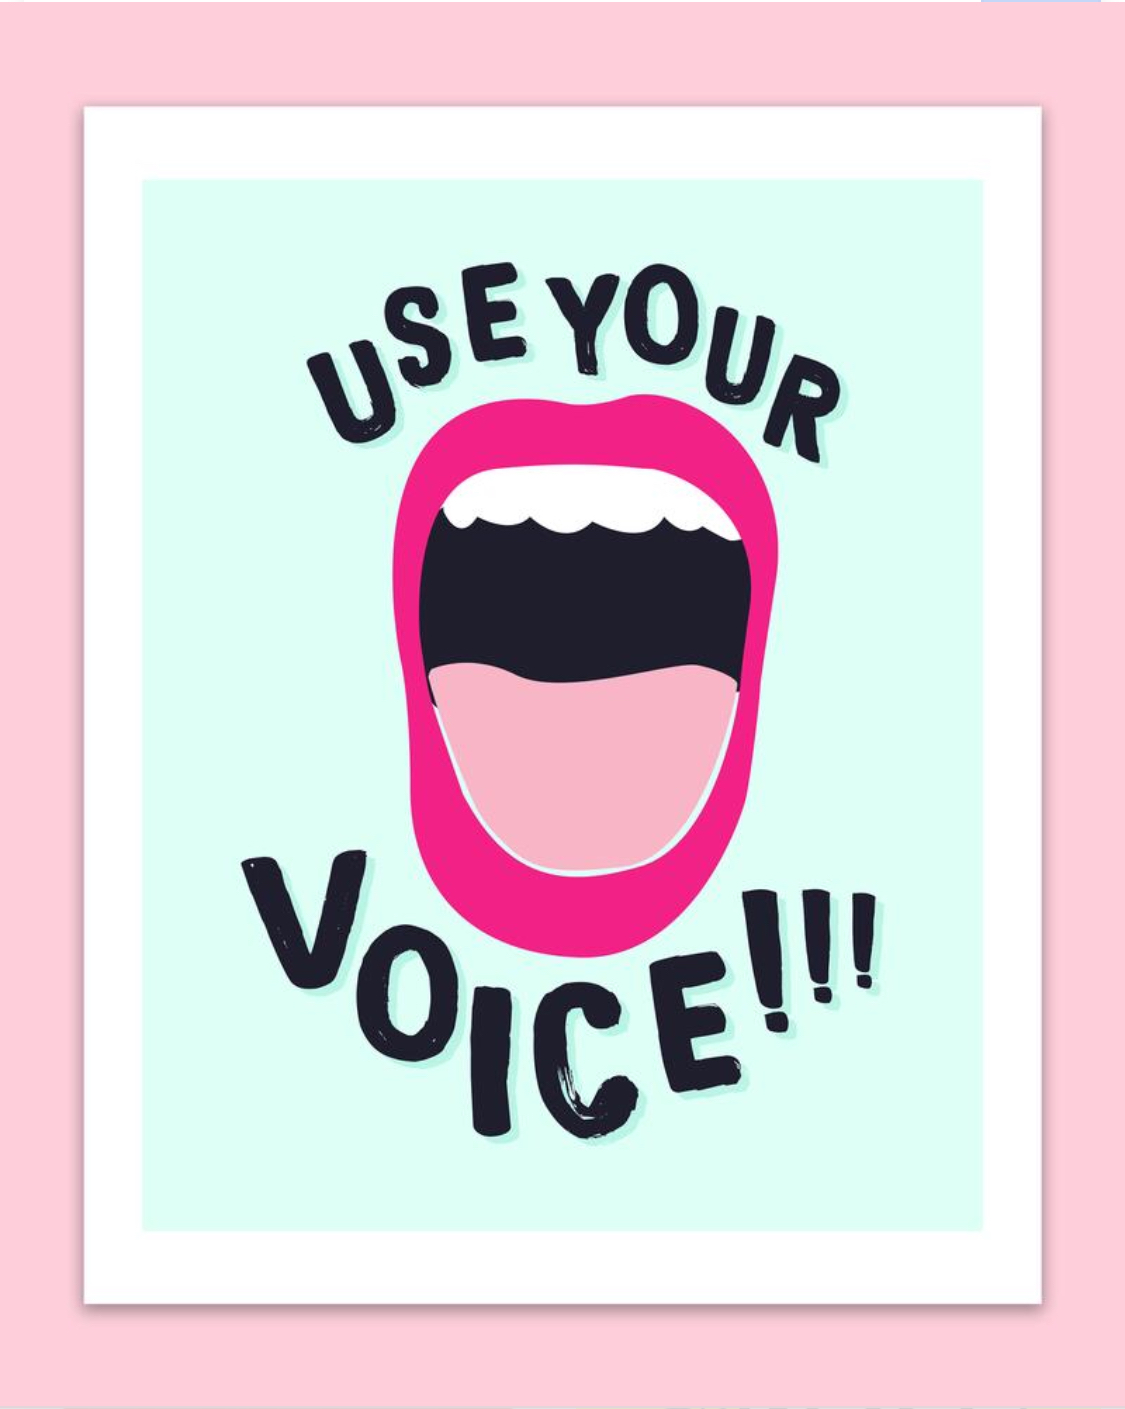 Use your voice 